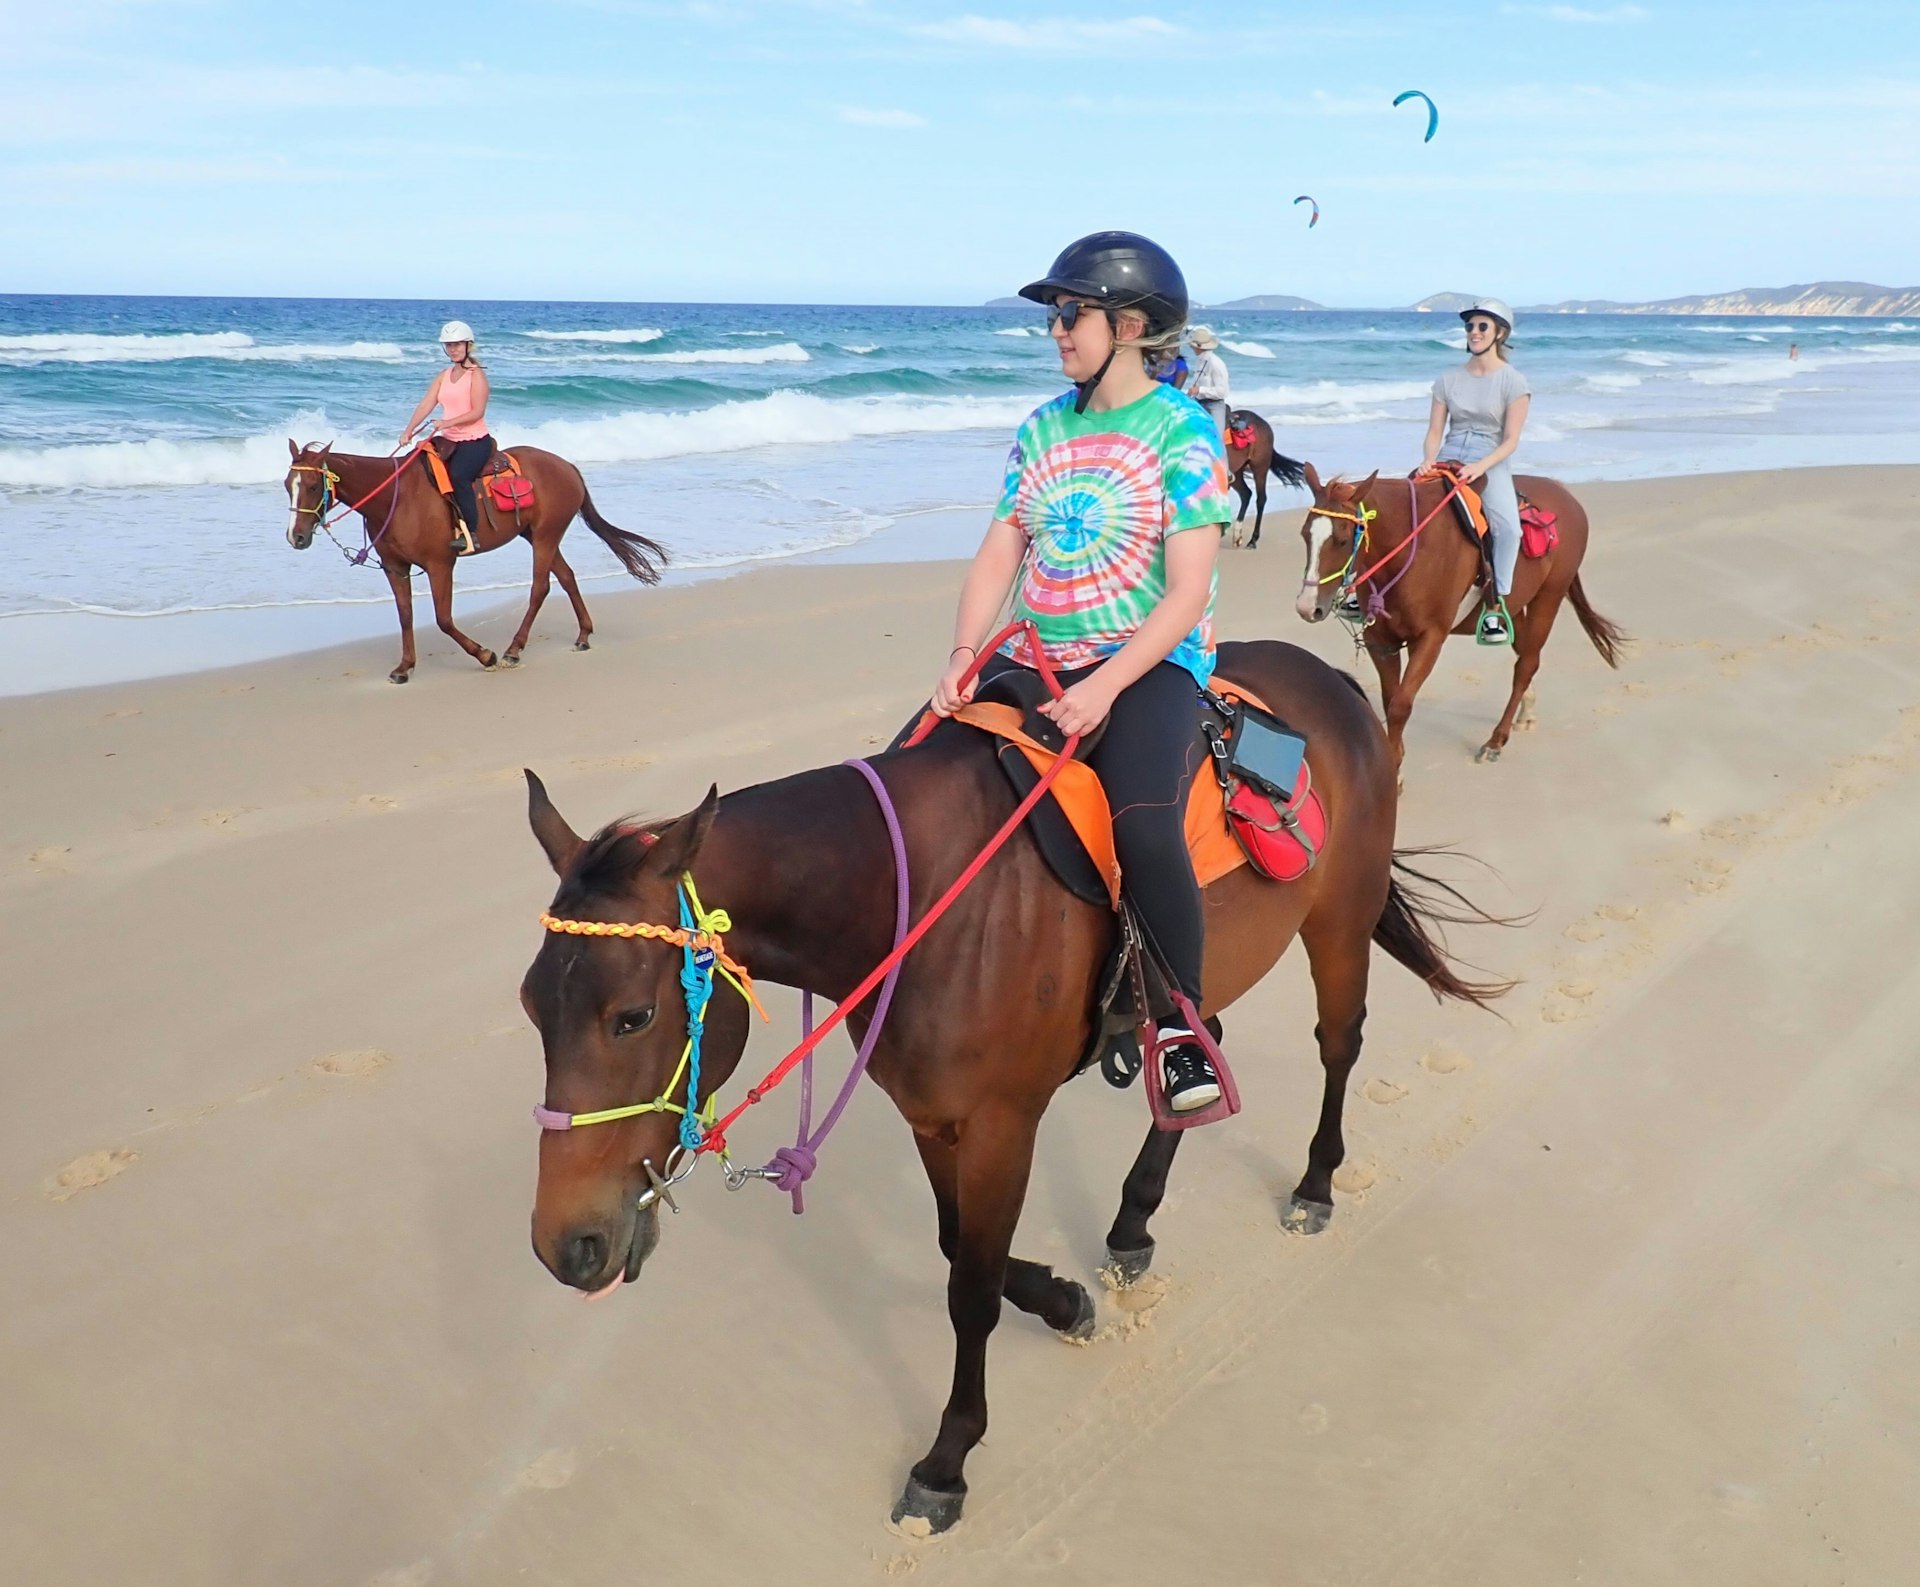 A young woman wearing a tie-died t-shirt, black grousers, helmet and sunglasses rides a chesnut-coloured horse with brighly coloured reigns, which range from purple and orange to red, blue and green; behind her are two other riders on the same section of beach, with crashing waves beyond and two kite-surfers in the distance